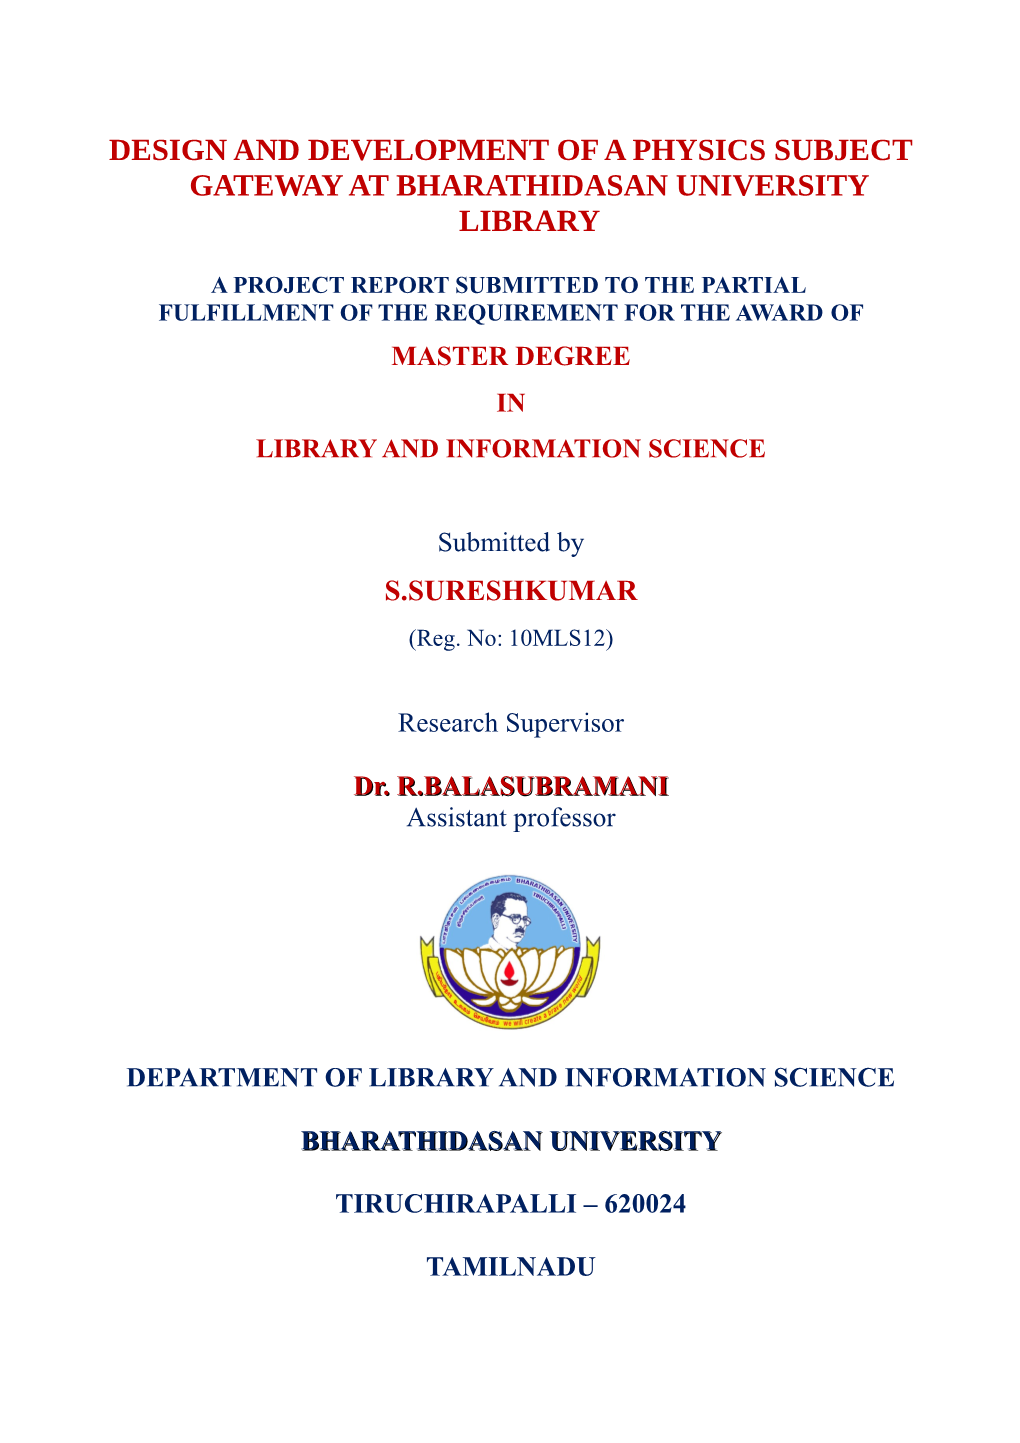 Design and Development of a Physics Subject Gateway at Bharathidasan University Library